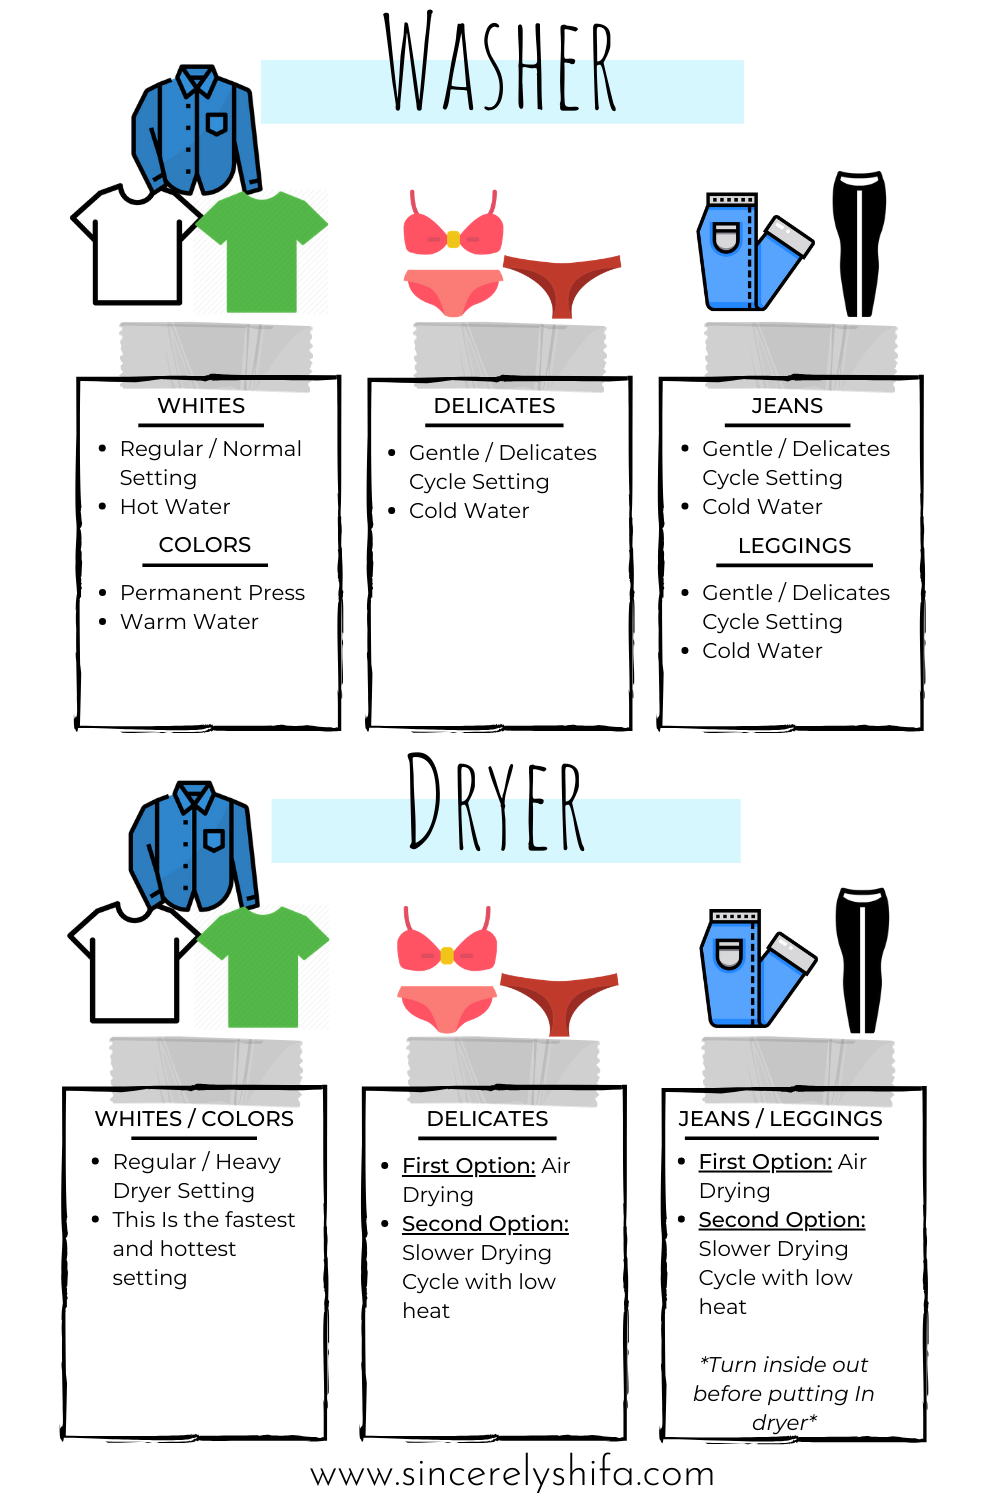 How Often You Should Wash Everything - The Ultimate Laundry Check List